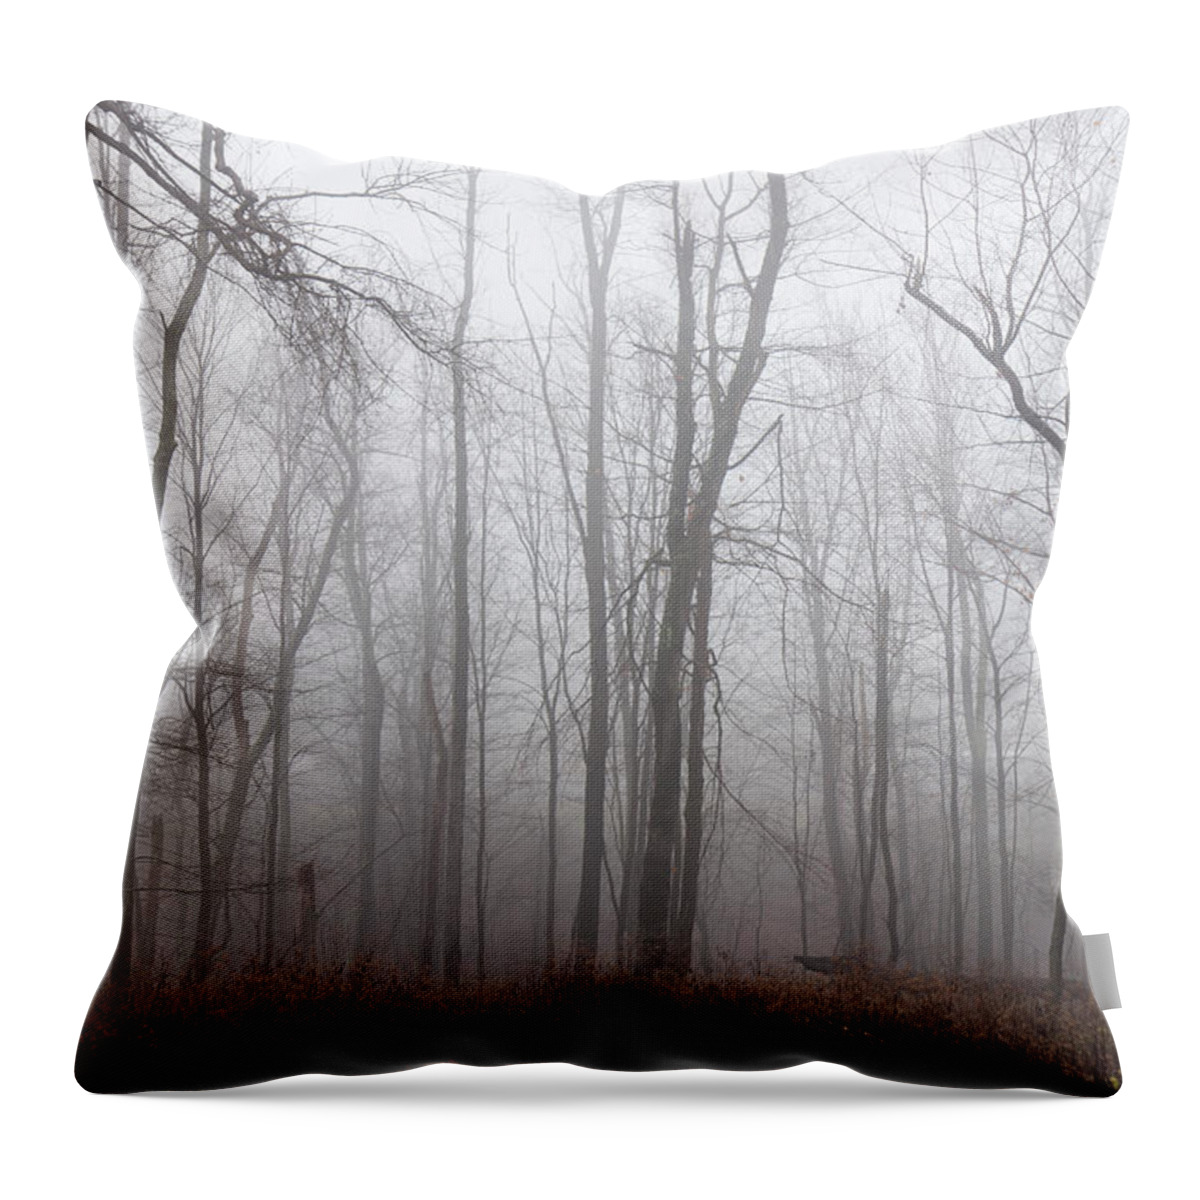 Cool Attitude Throw Pillow featuring the photograph Foggy Woods by Njw1224